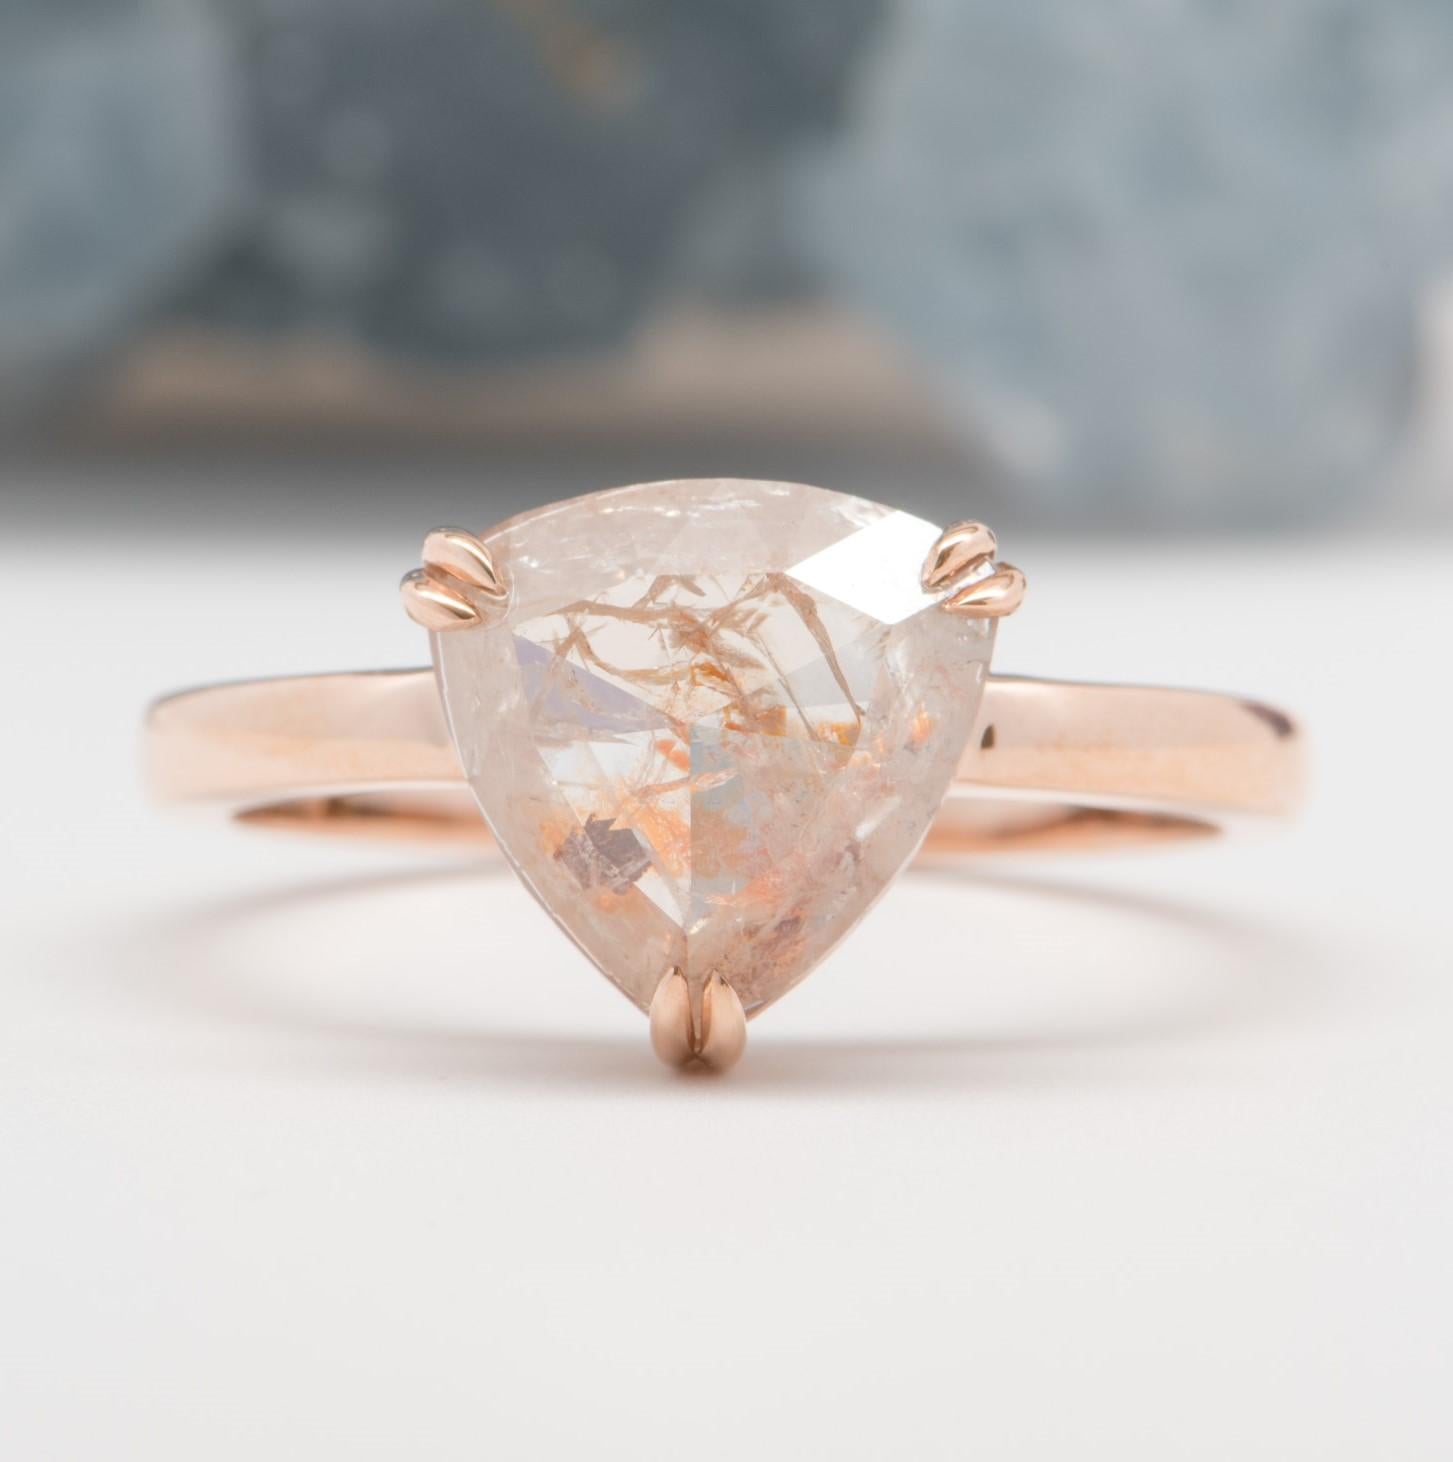 *** CUSTOM LISTING FOR MANUEL SALCEDO ***
♥  Solid 14K rose gold ring set with a triangle-shaped Koi Fish diamond (it's a diamond that has coral/orange color inclusions with a lot of transparency!)
♥  The overall setting measures 10.4mm in width,